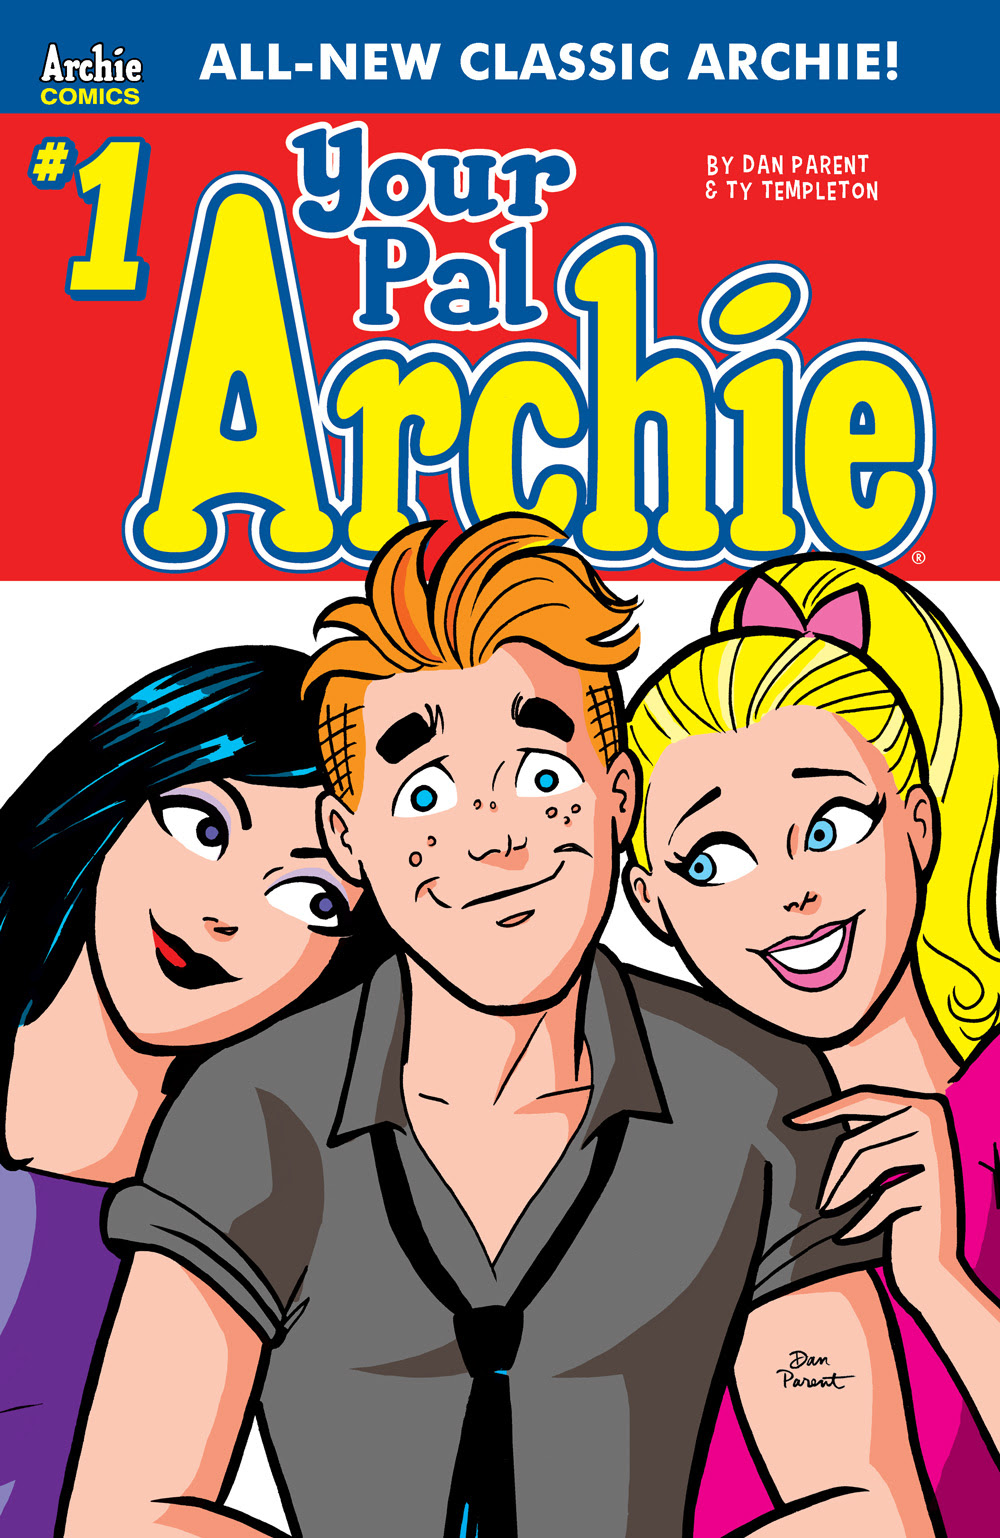 A New Archie Comic Will Draw Inspiration From Riverdale, A Show Based On The Archie Comics